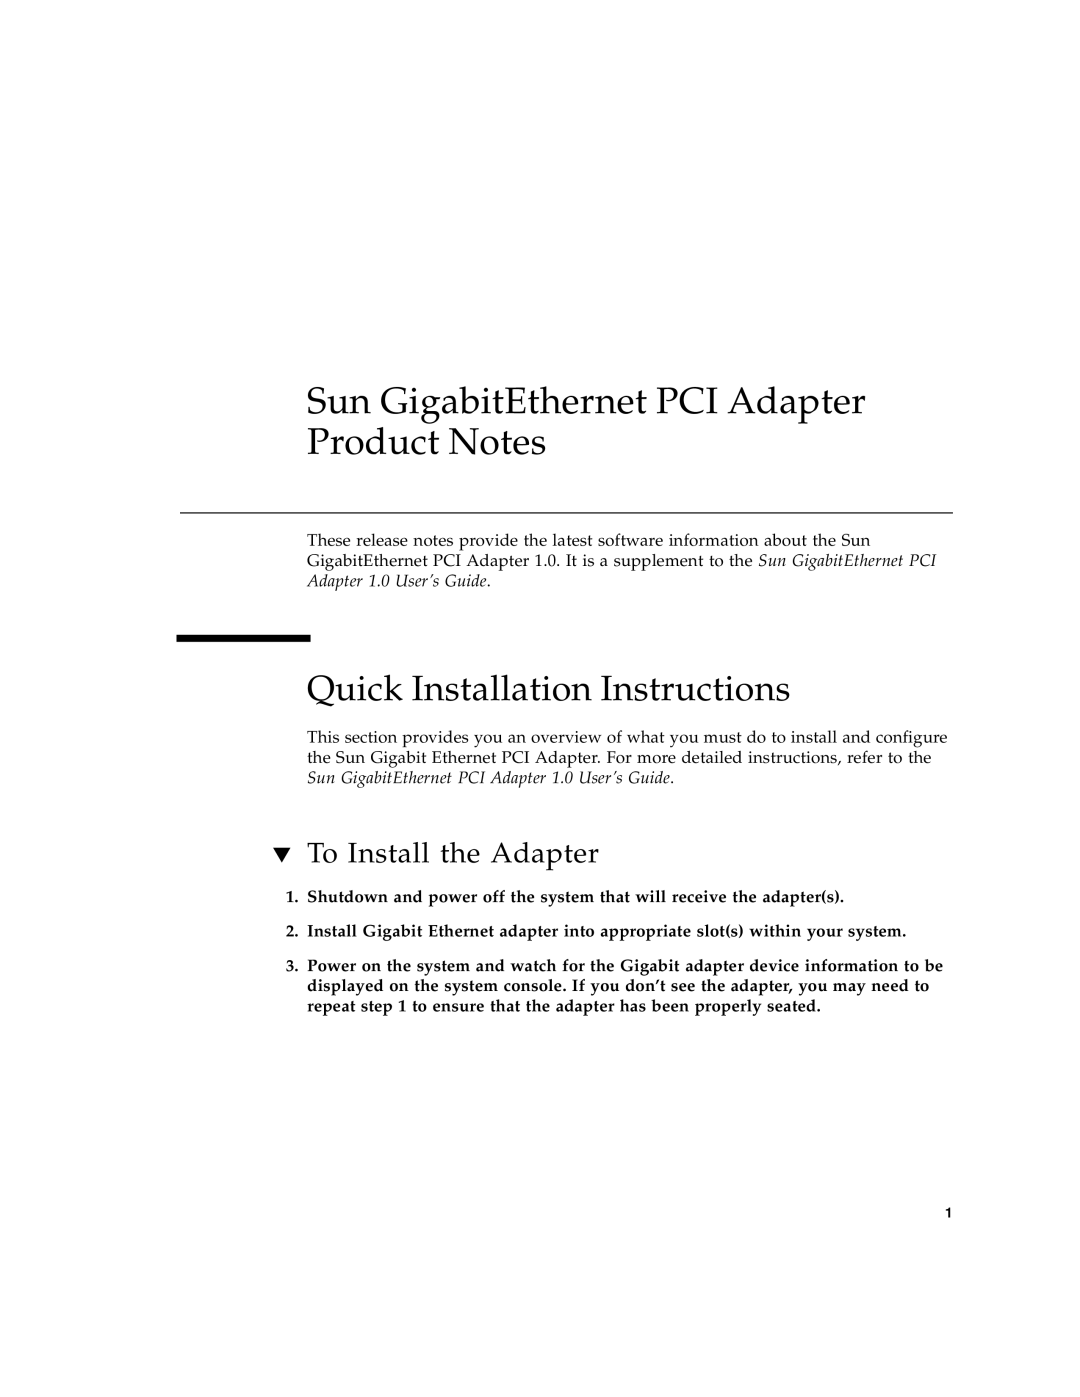 Sun Microsystems 1 Quick Installation Instructions, To Install the Adapter, Sun GigabitEthernet PCI Adapter Product Notes 